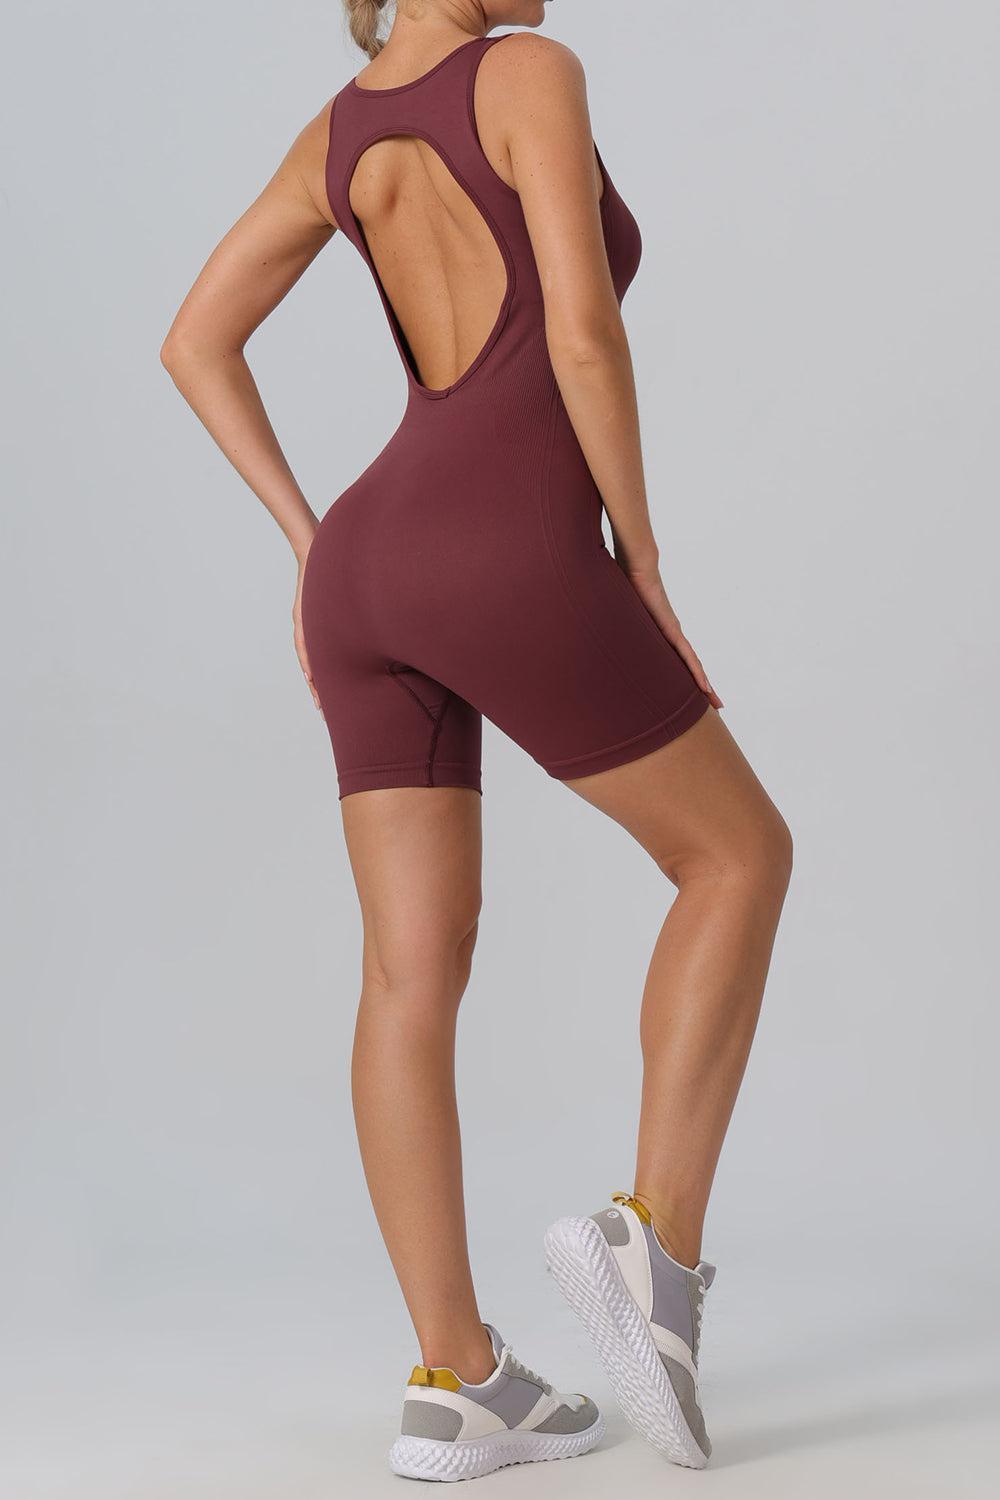 a woman in a maroon bodysuit with a back cut out